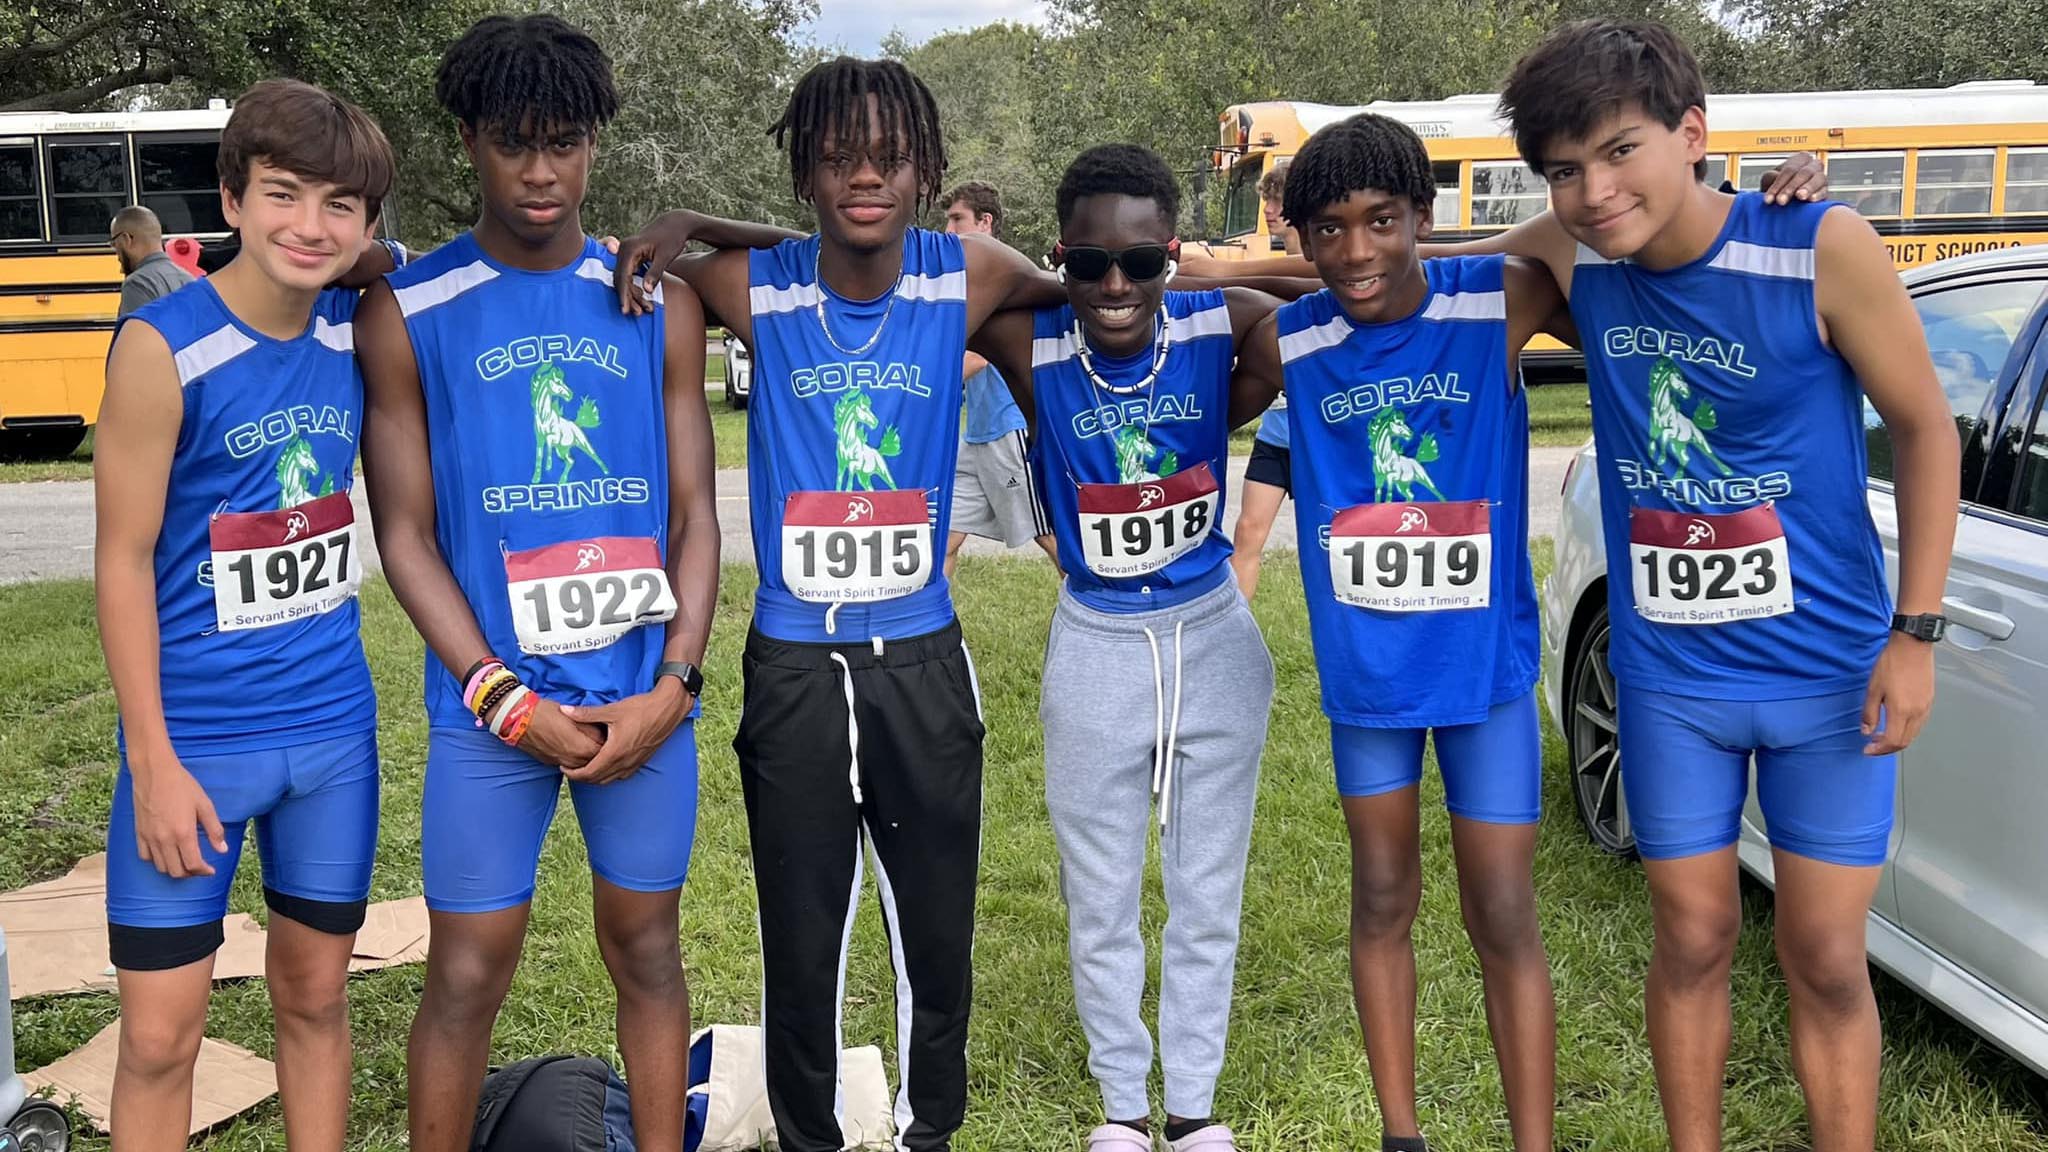 4 Track and Field Teams in Coral Springs Start Season With Win